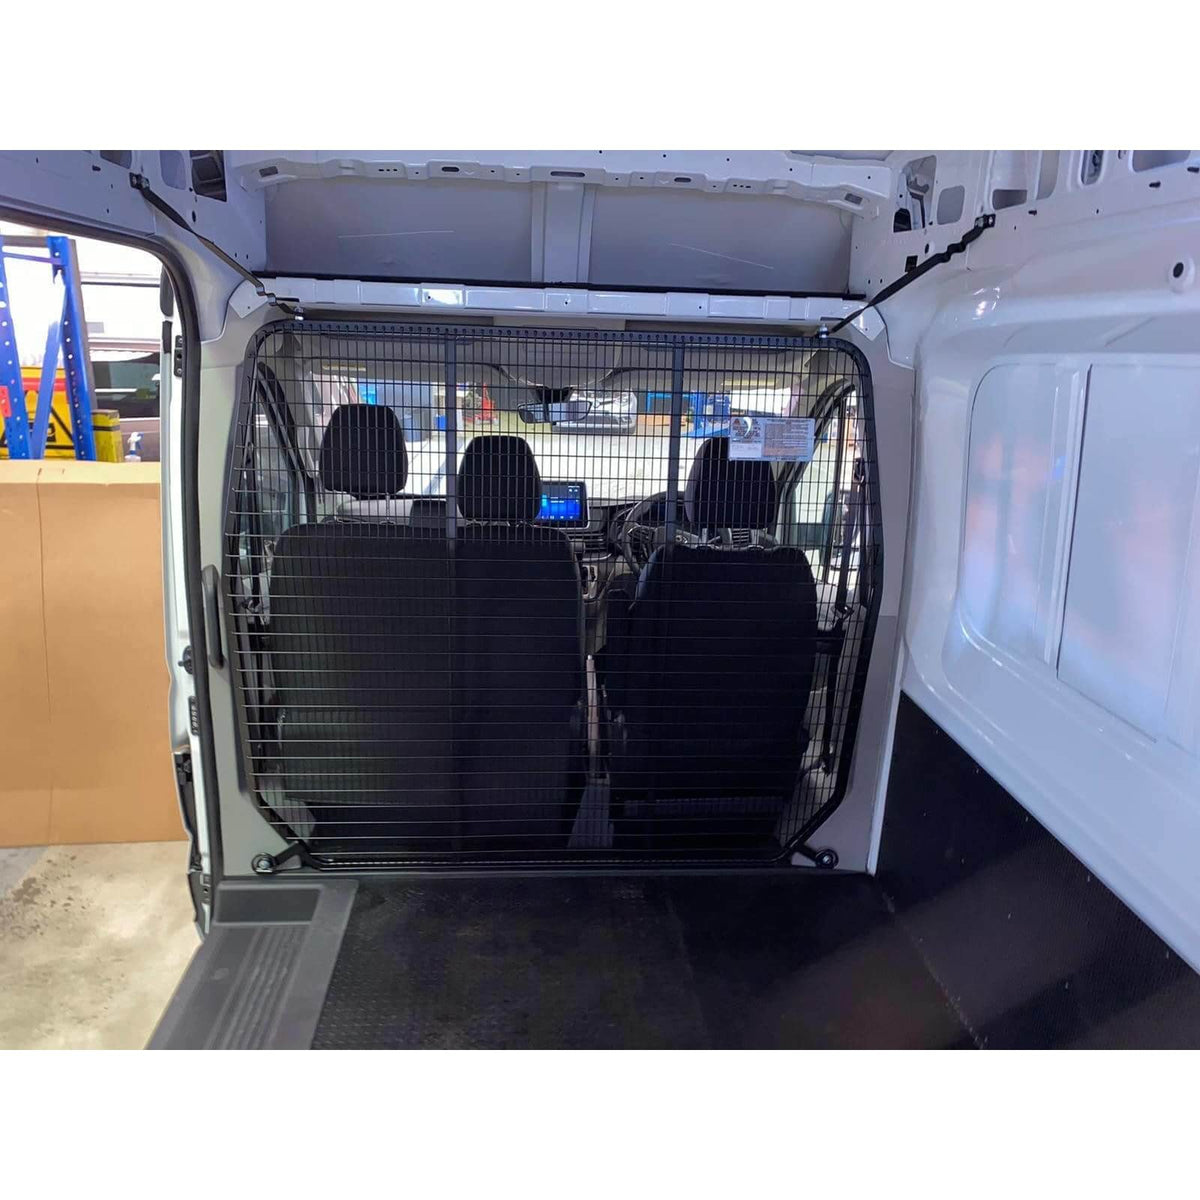 LDV Deliver 9 Cargo Barrier For Mid & High Roof | ARG Parts & Accessories.